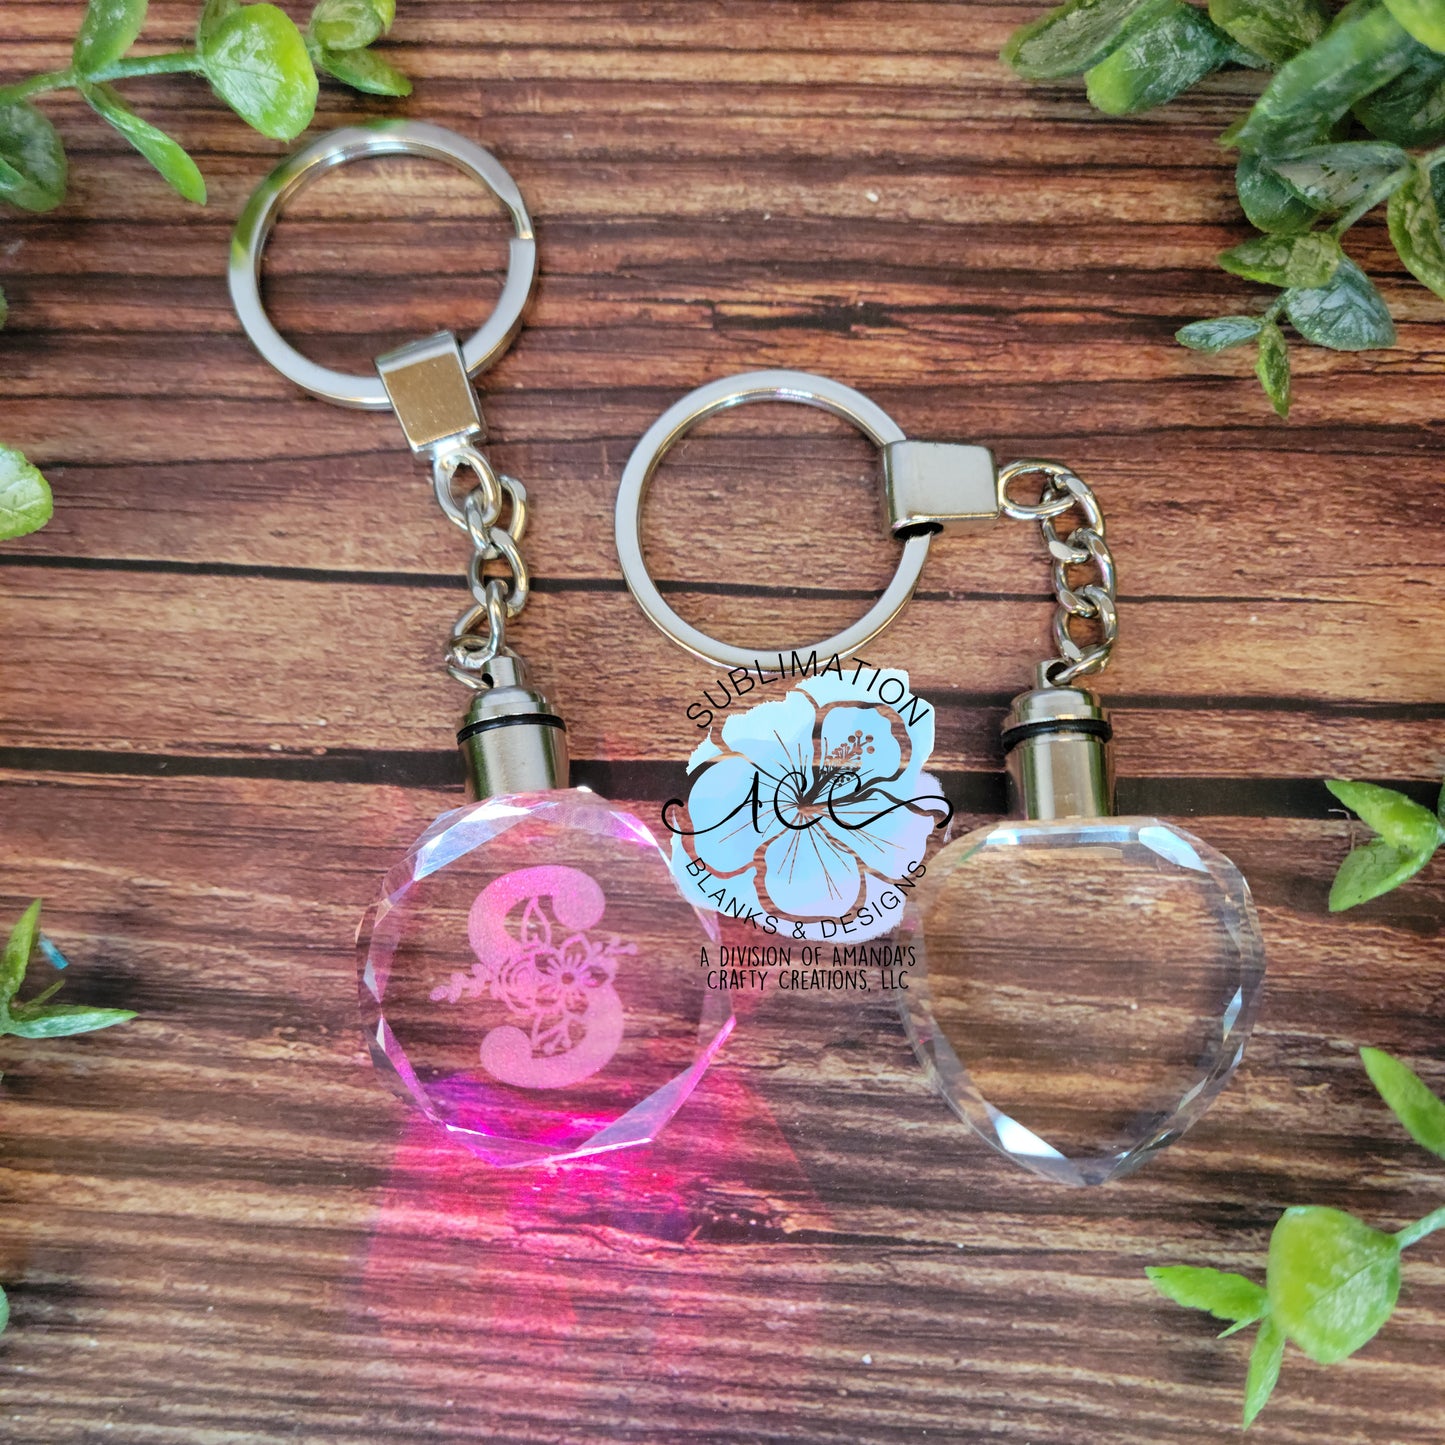 Glass crystal LED lighted keychain, glass engraving keychain blank, 7 color change LED glass crystal keychain RTS